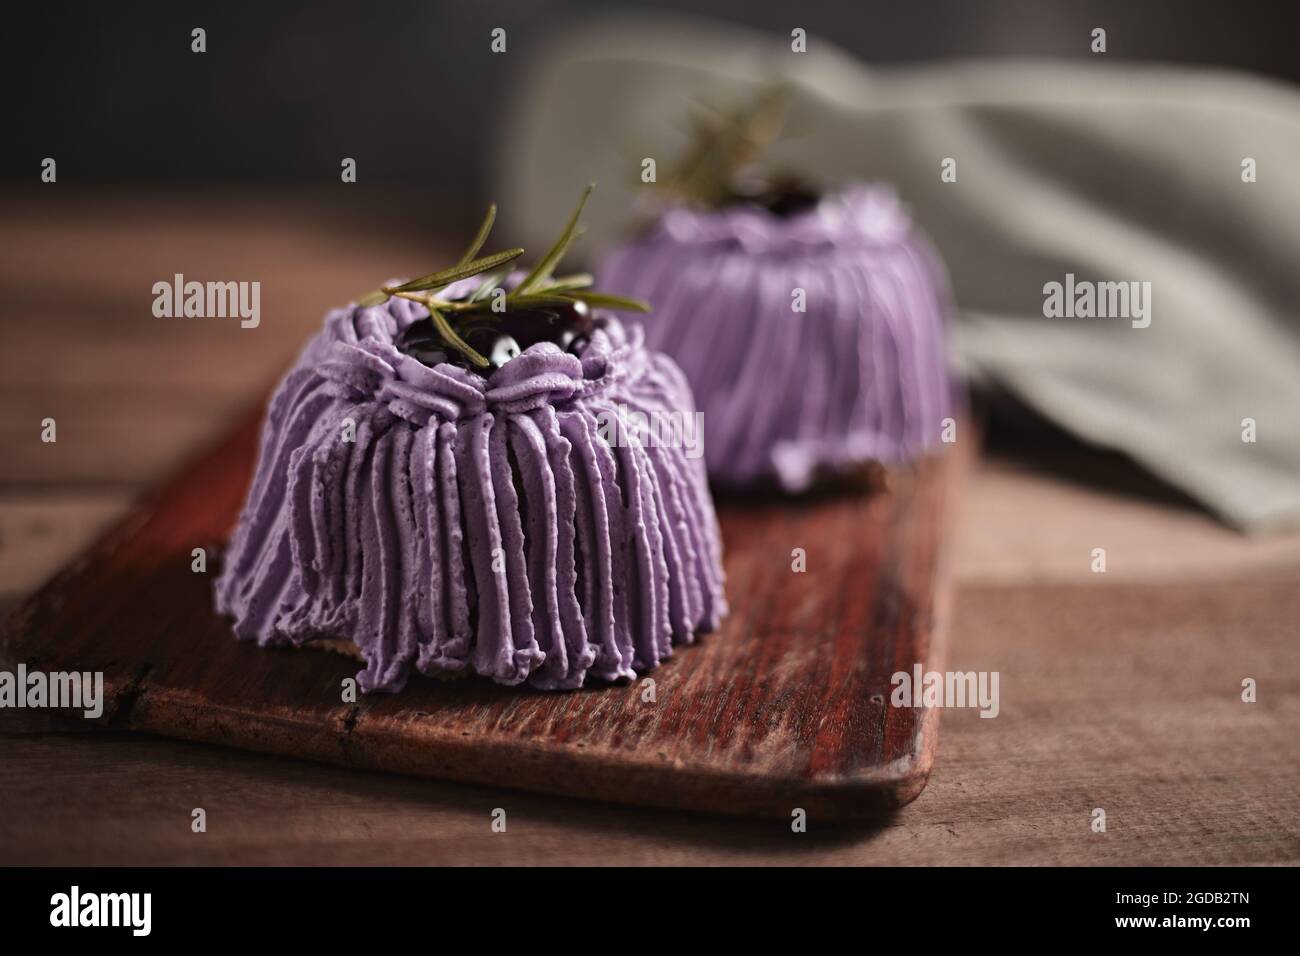 Yummy sweet Blueberry cake with Blueberry toping Stock Photo